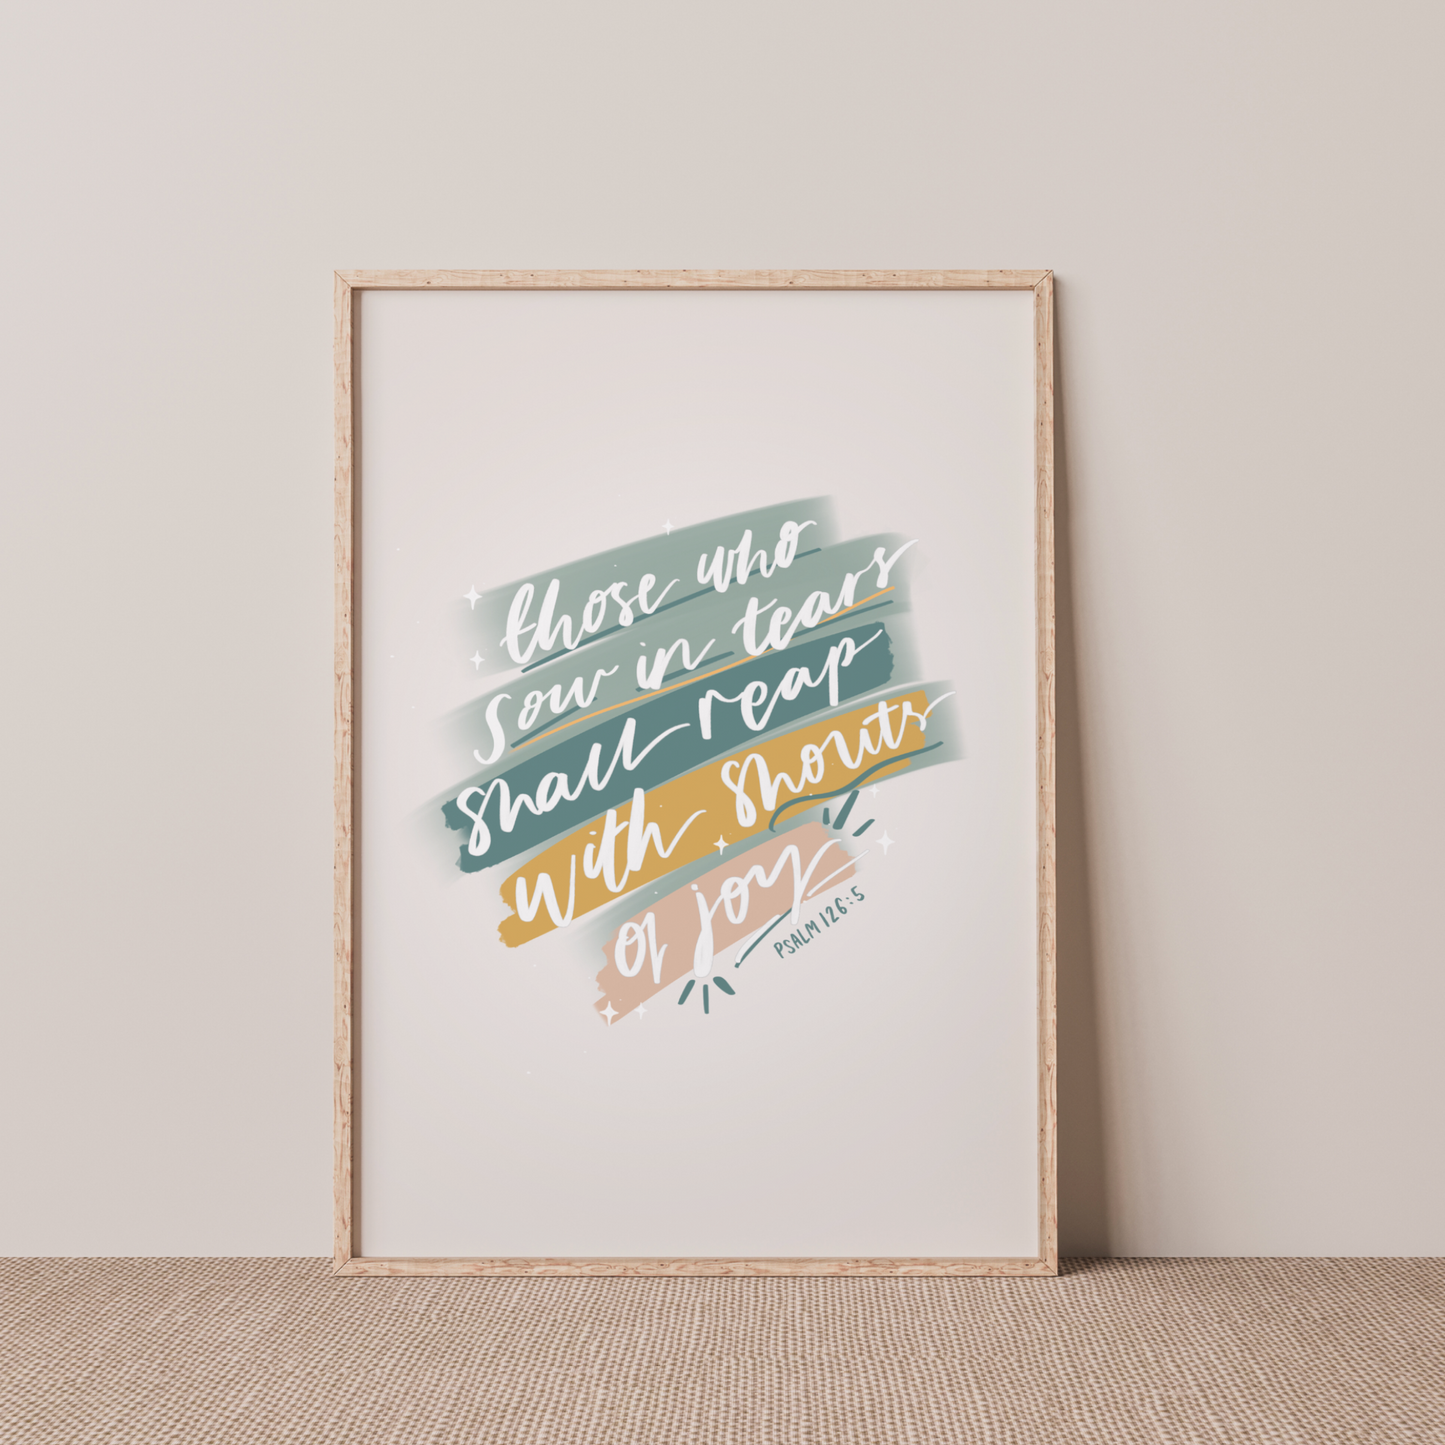 Those who sow in tears - Psalm 126:5 Print